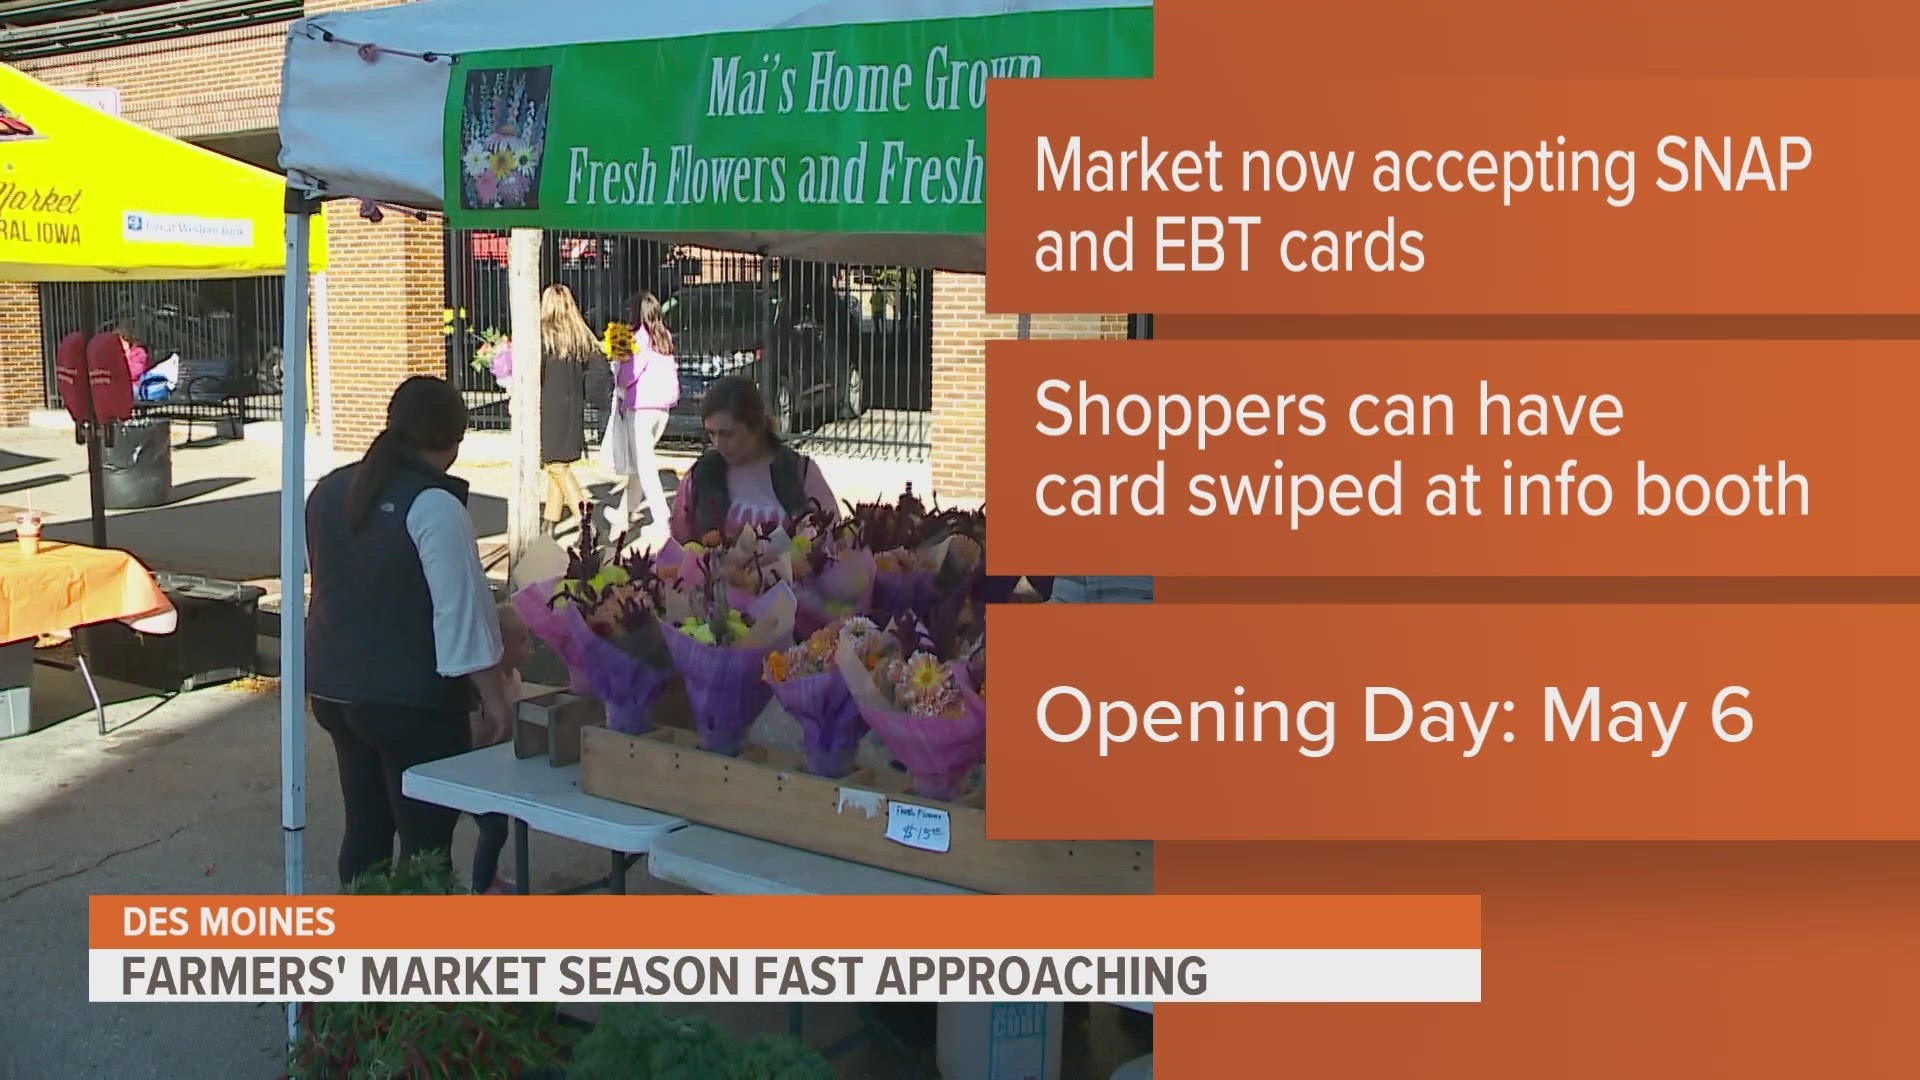 Farmers' market shoppers can have their cards swiped at the information booth in exchange for market tokens. Opening day is Saturday, May 6.